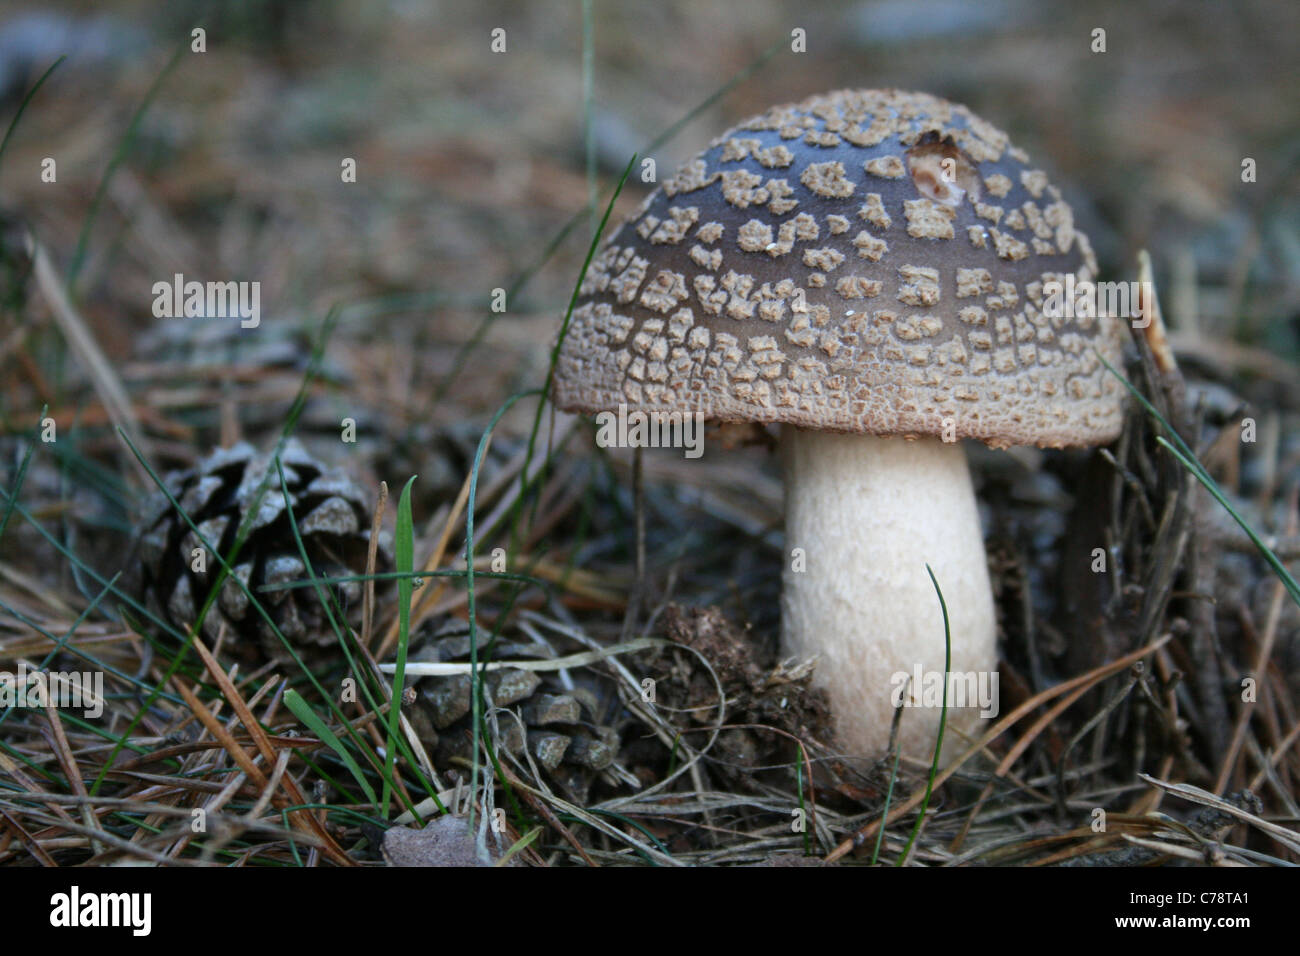 The Blusher (Amanita rubescens) growing in conifer forest, Bracknell, Berkshire. Stock Photo